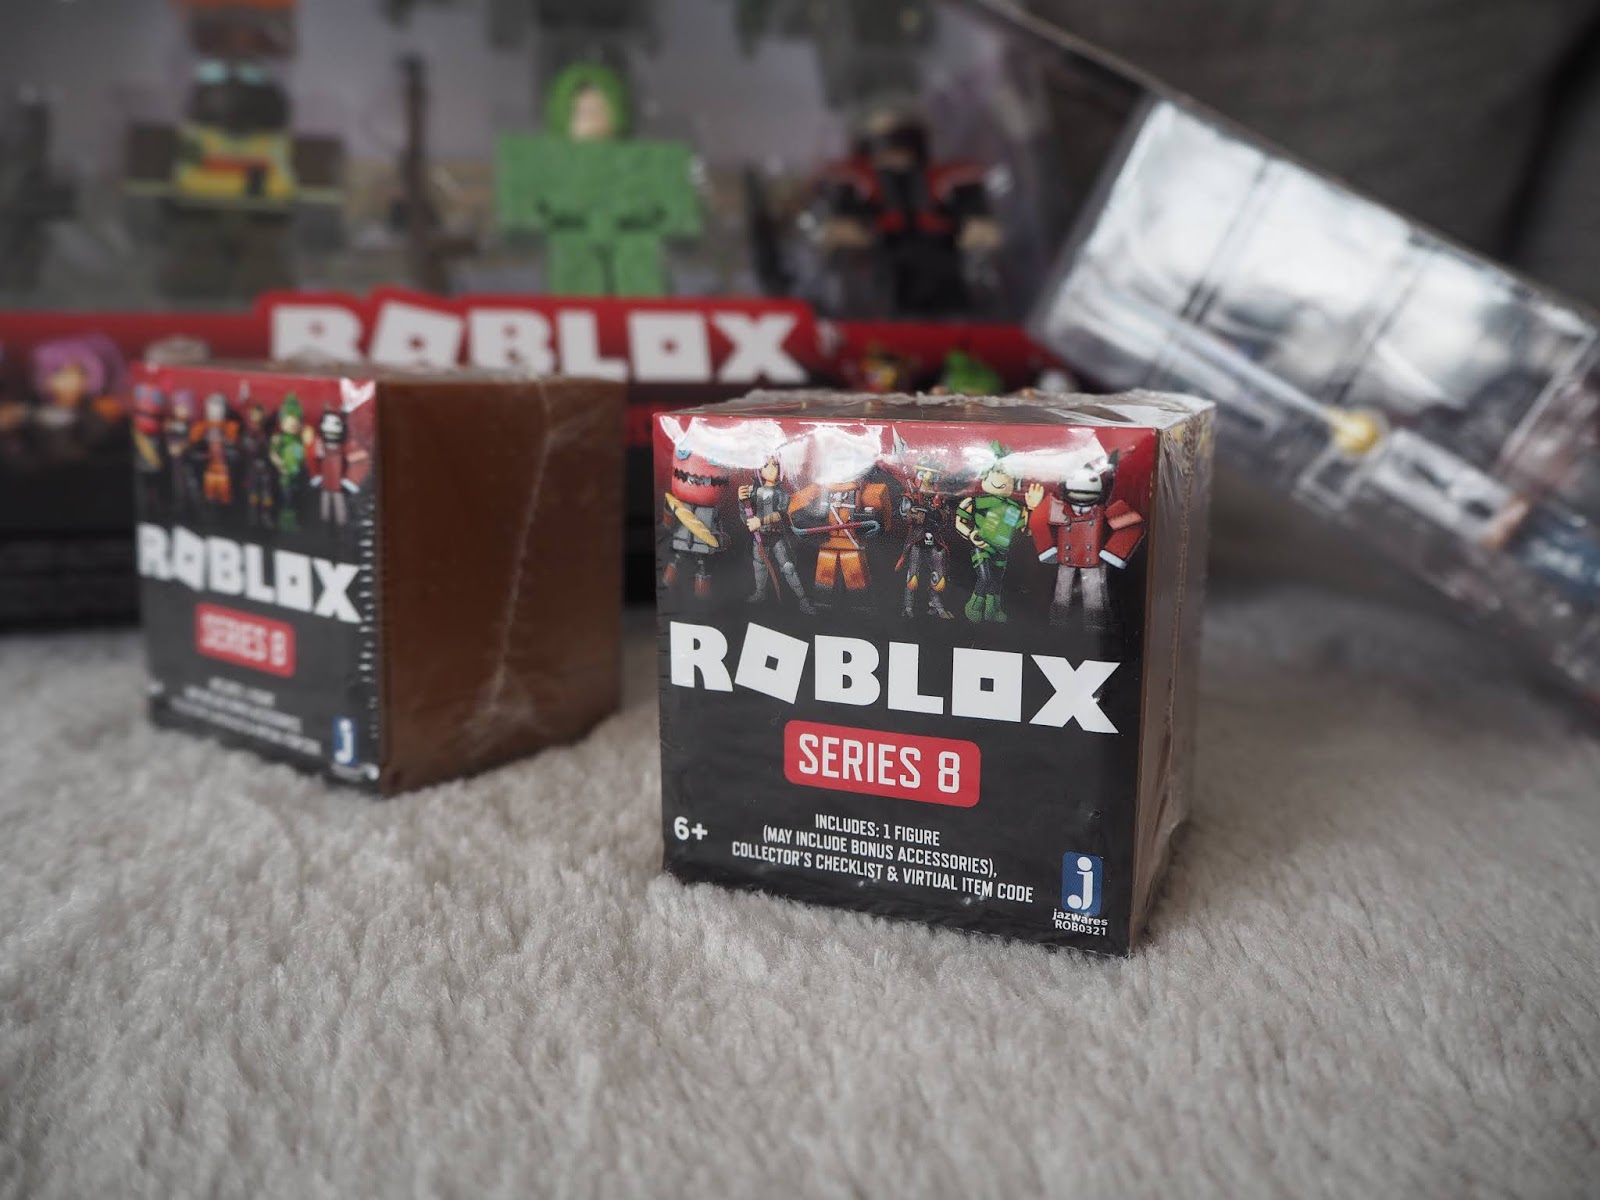 Ayo roblox is currently selling a toy that's essentially IP theft